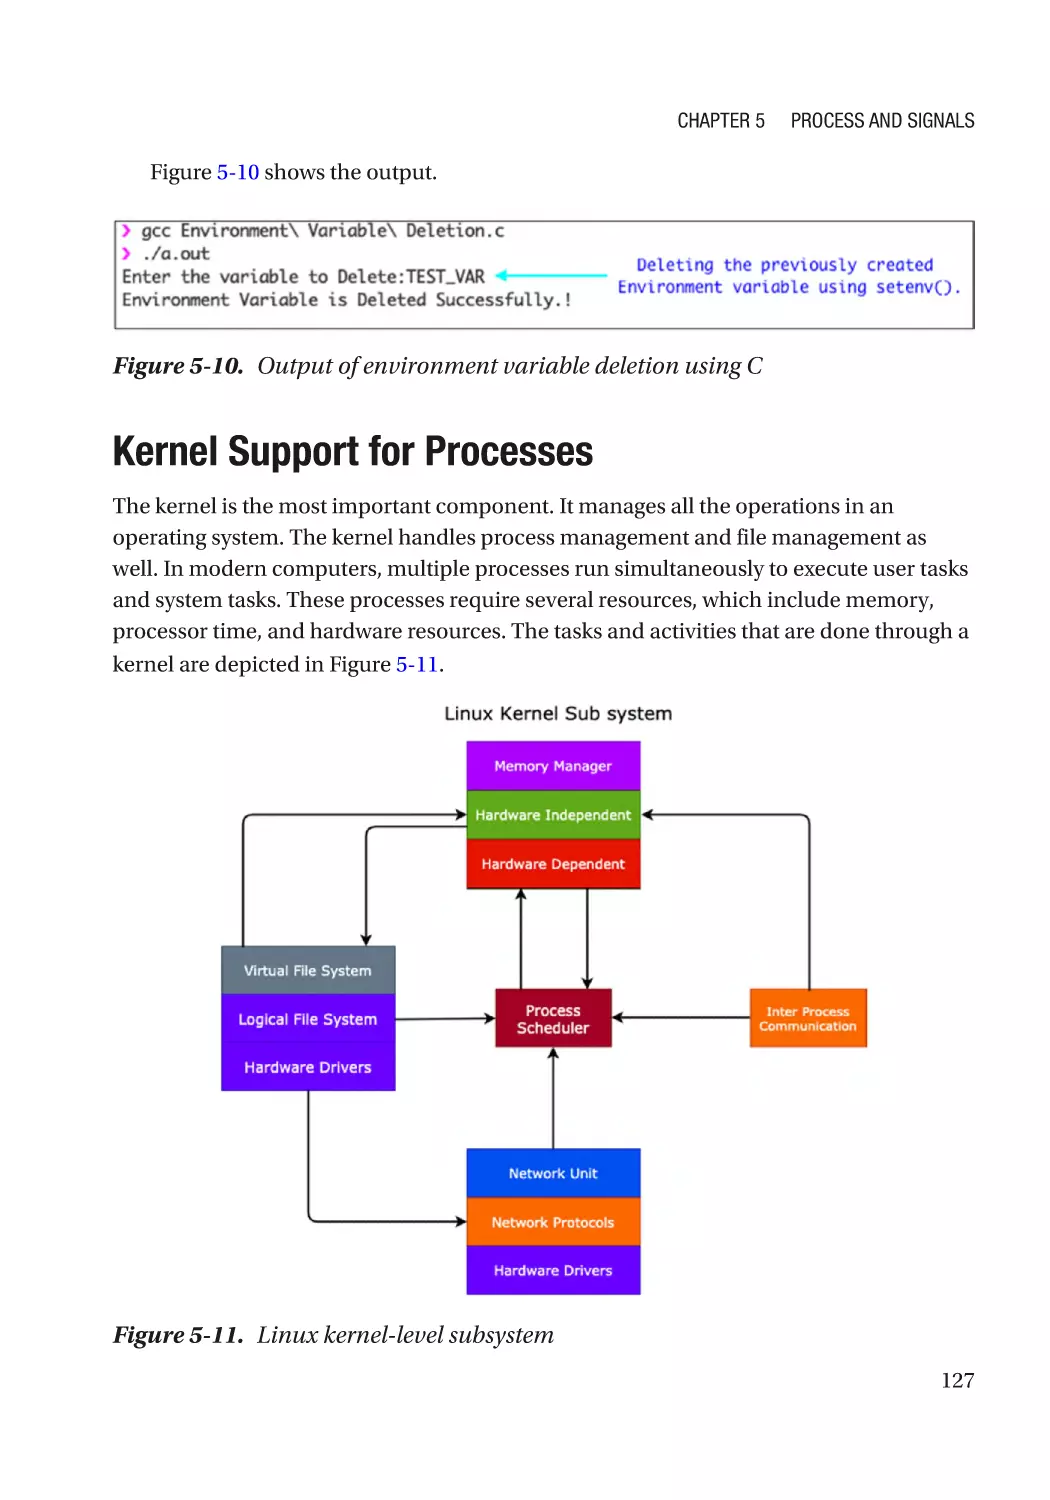 Kernel Support for Processes